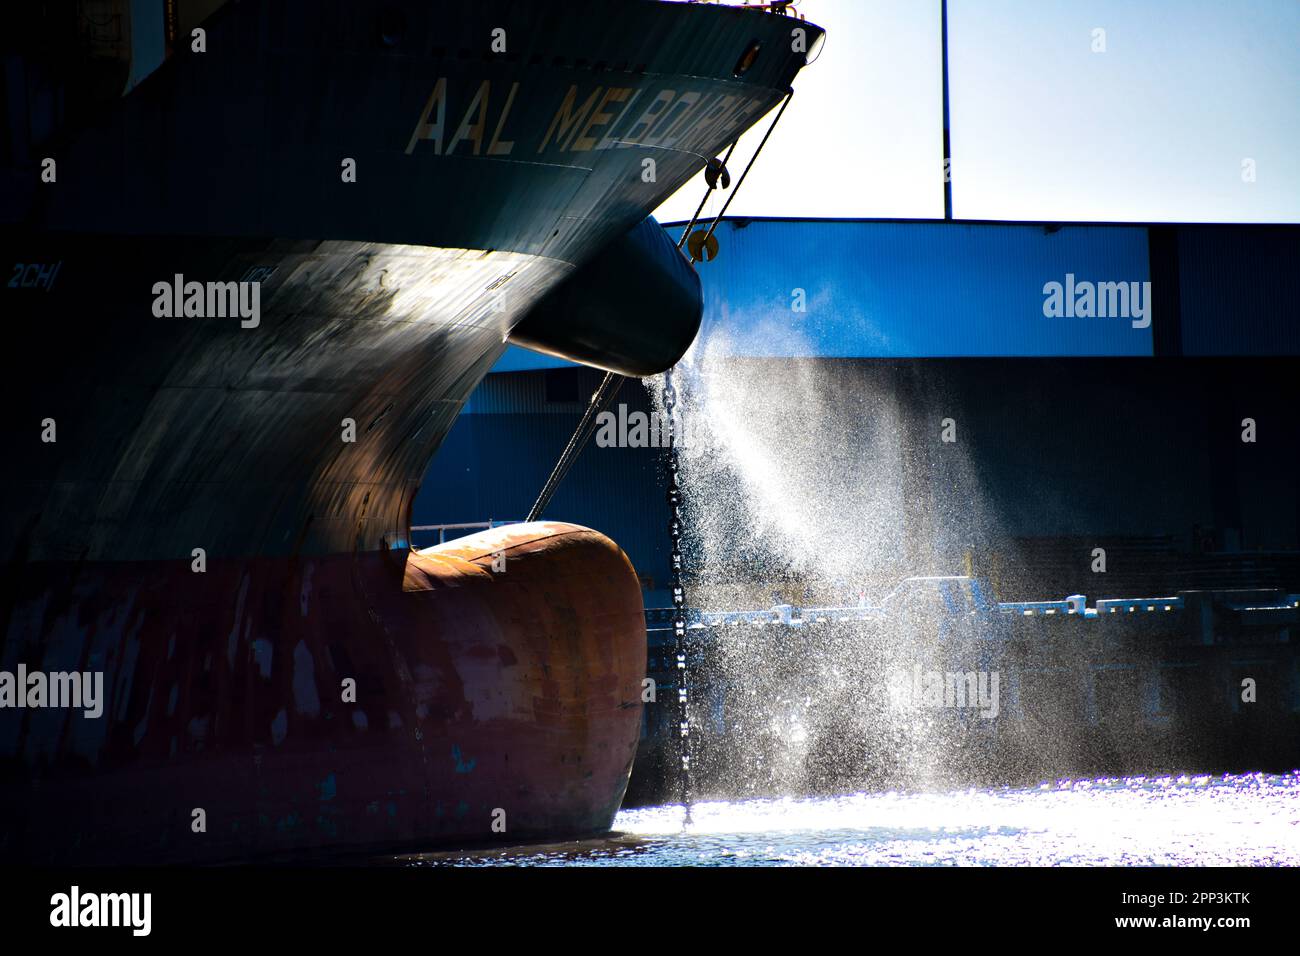 Closeup Front of Bulk Carrier with water spraying out in afternoon sunlight in Port Melbourne, Victoria, Australia Stock Photo